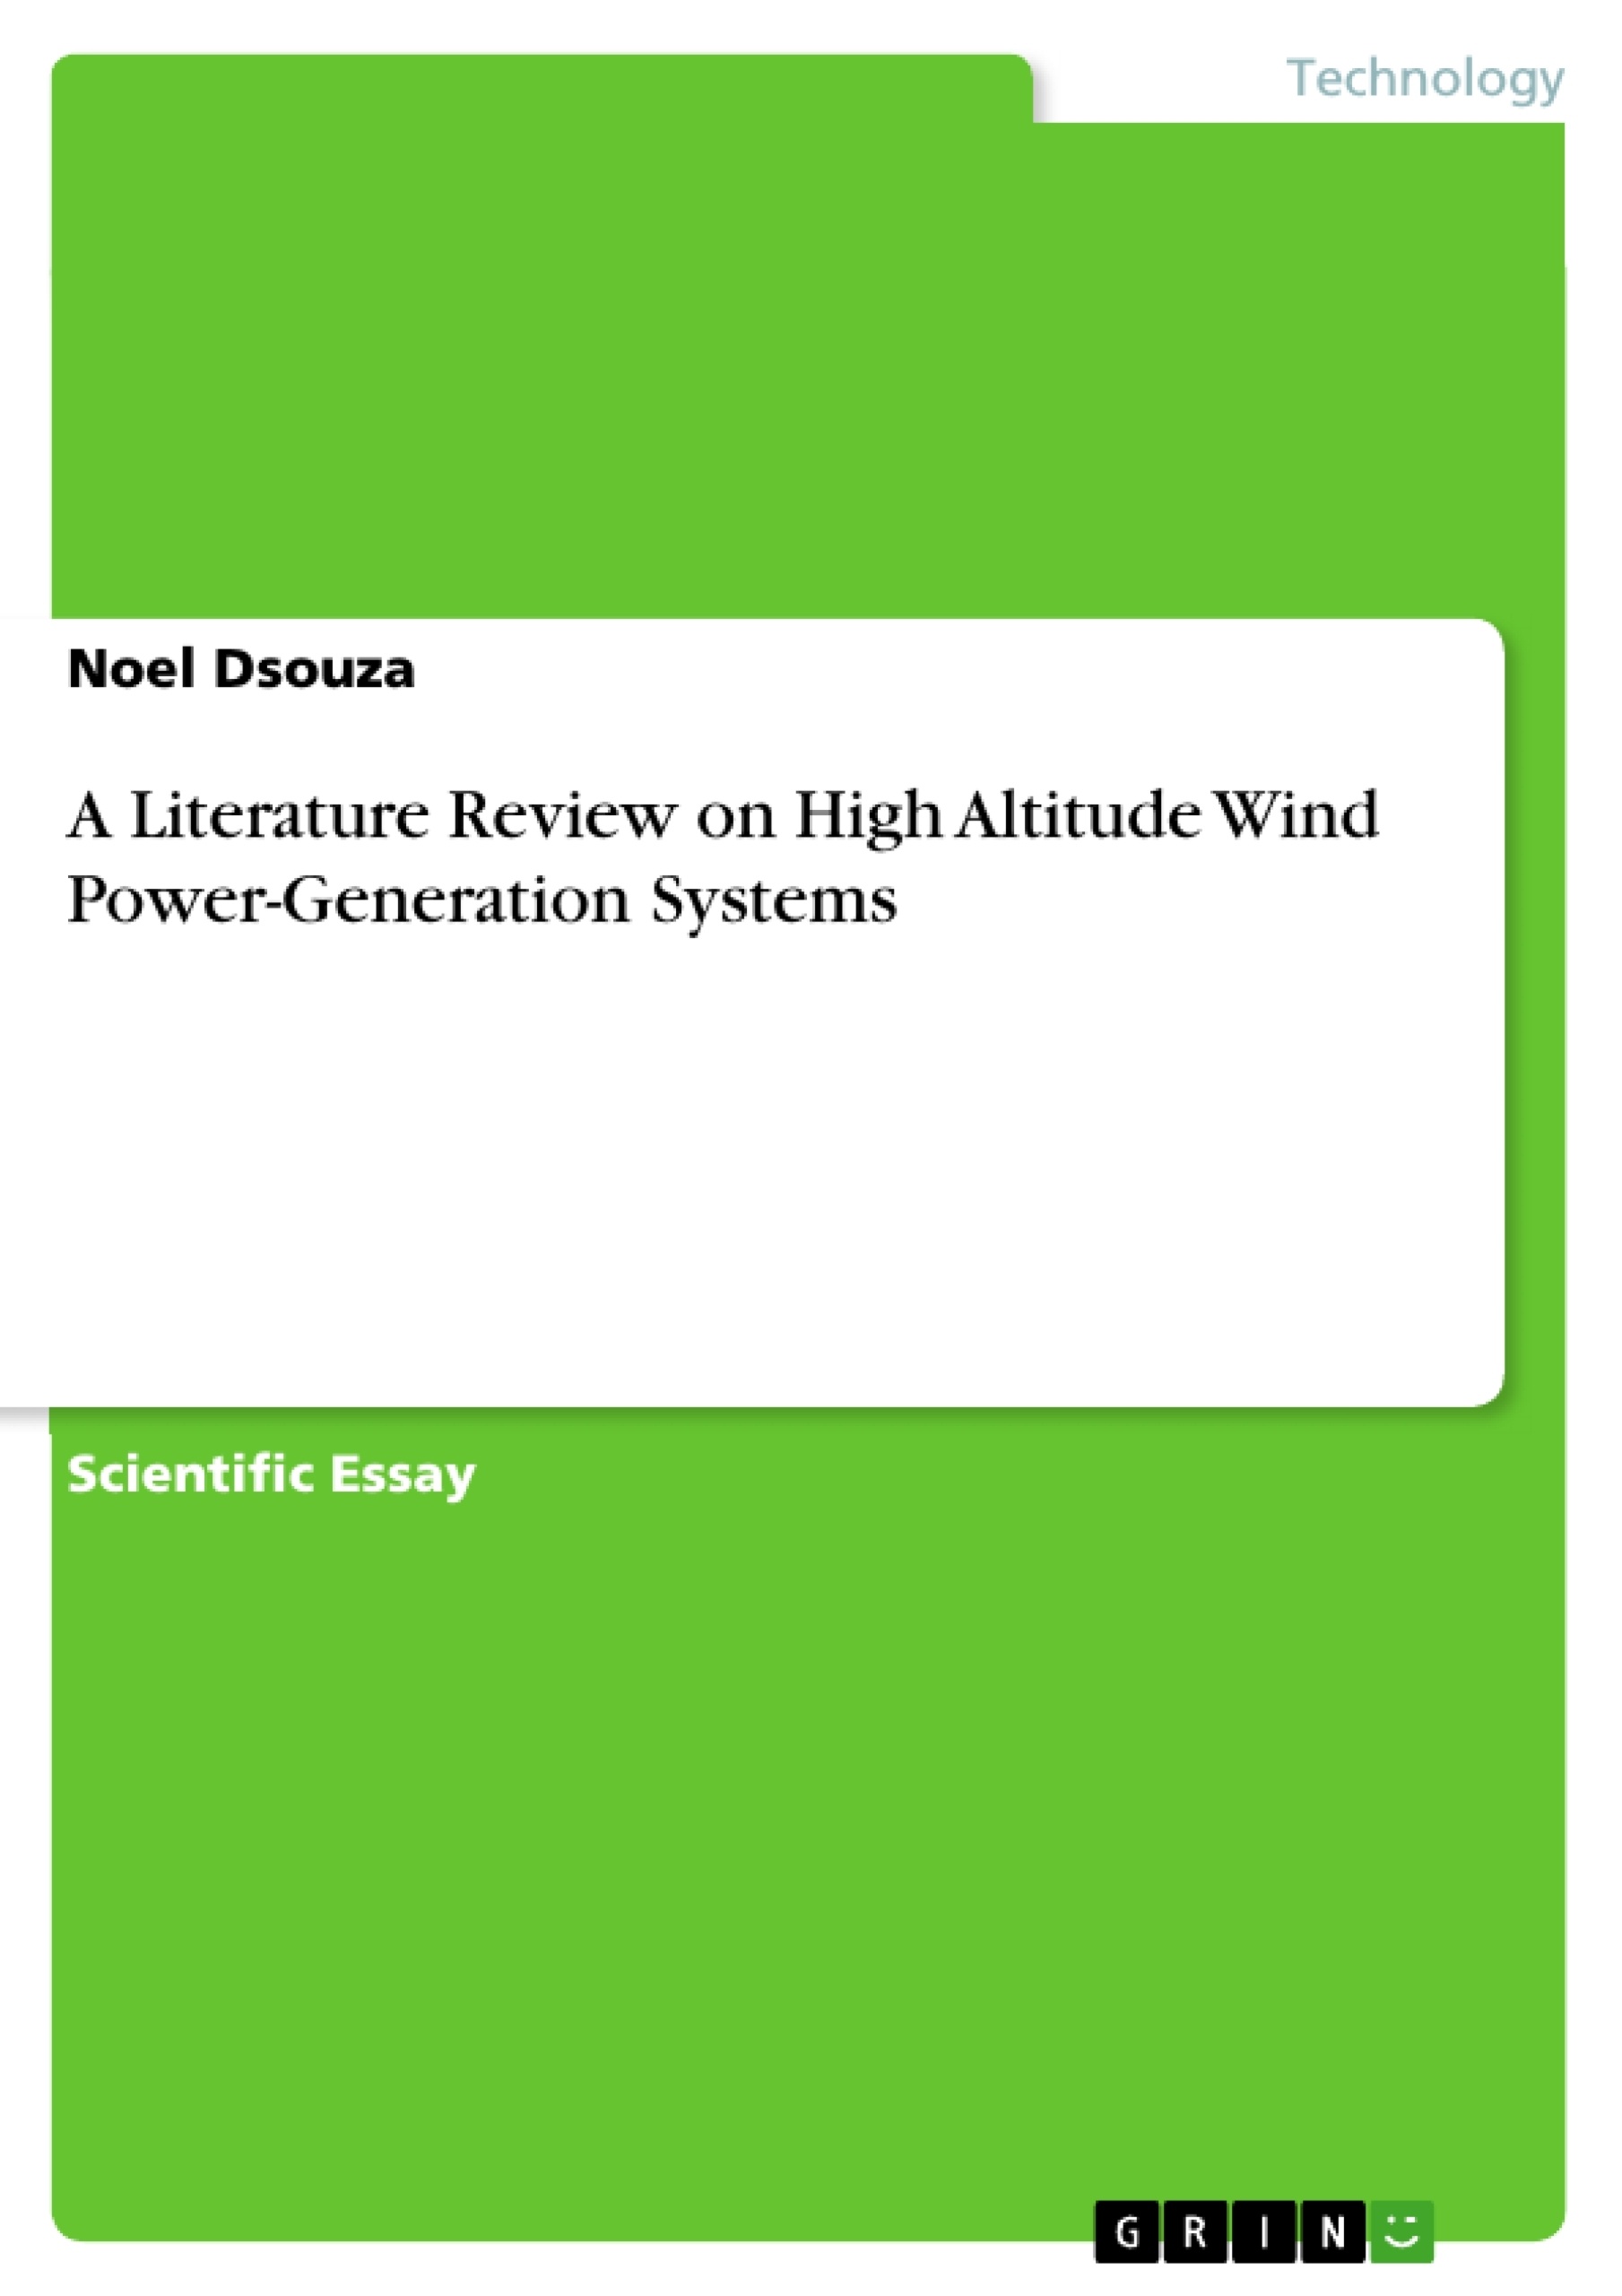 Title: A Literature Review on High Altitude Wind Power-Generation Systems